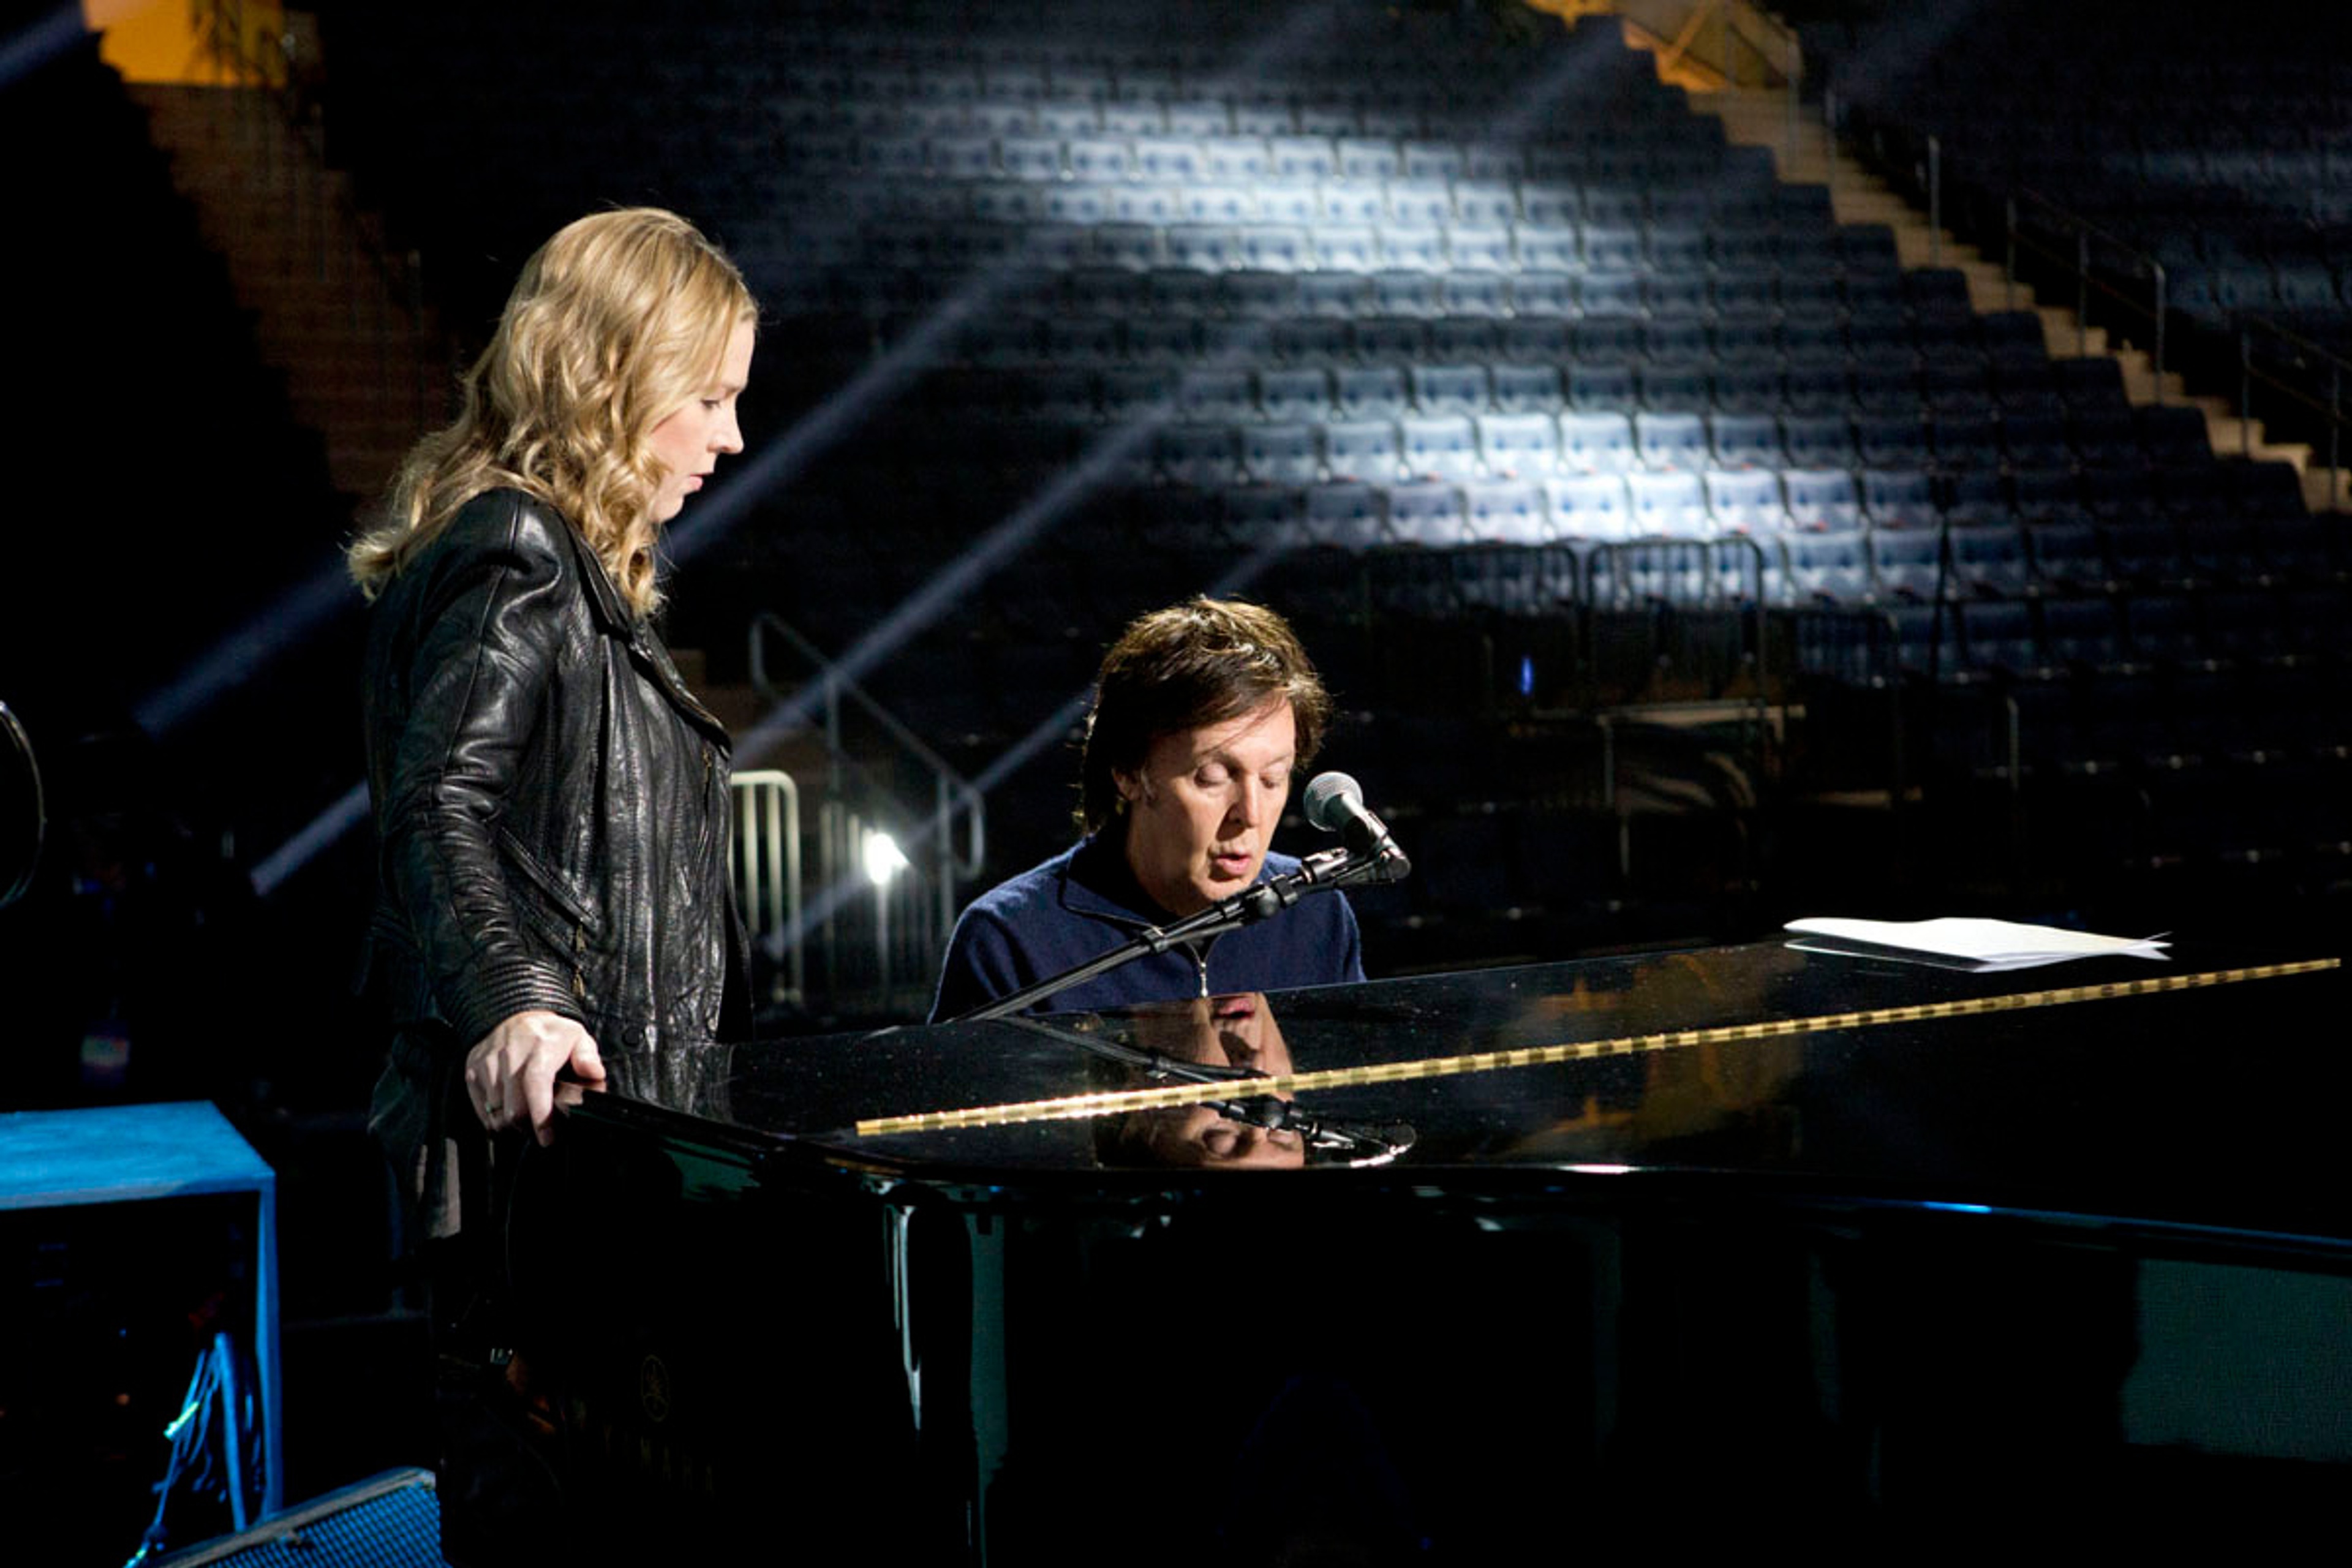 Diana Krall and Paul at rehearsals, 12-12-12 Hurricane Sandy Benefit, Madison Square Garden, NYC, 11th December 2012